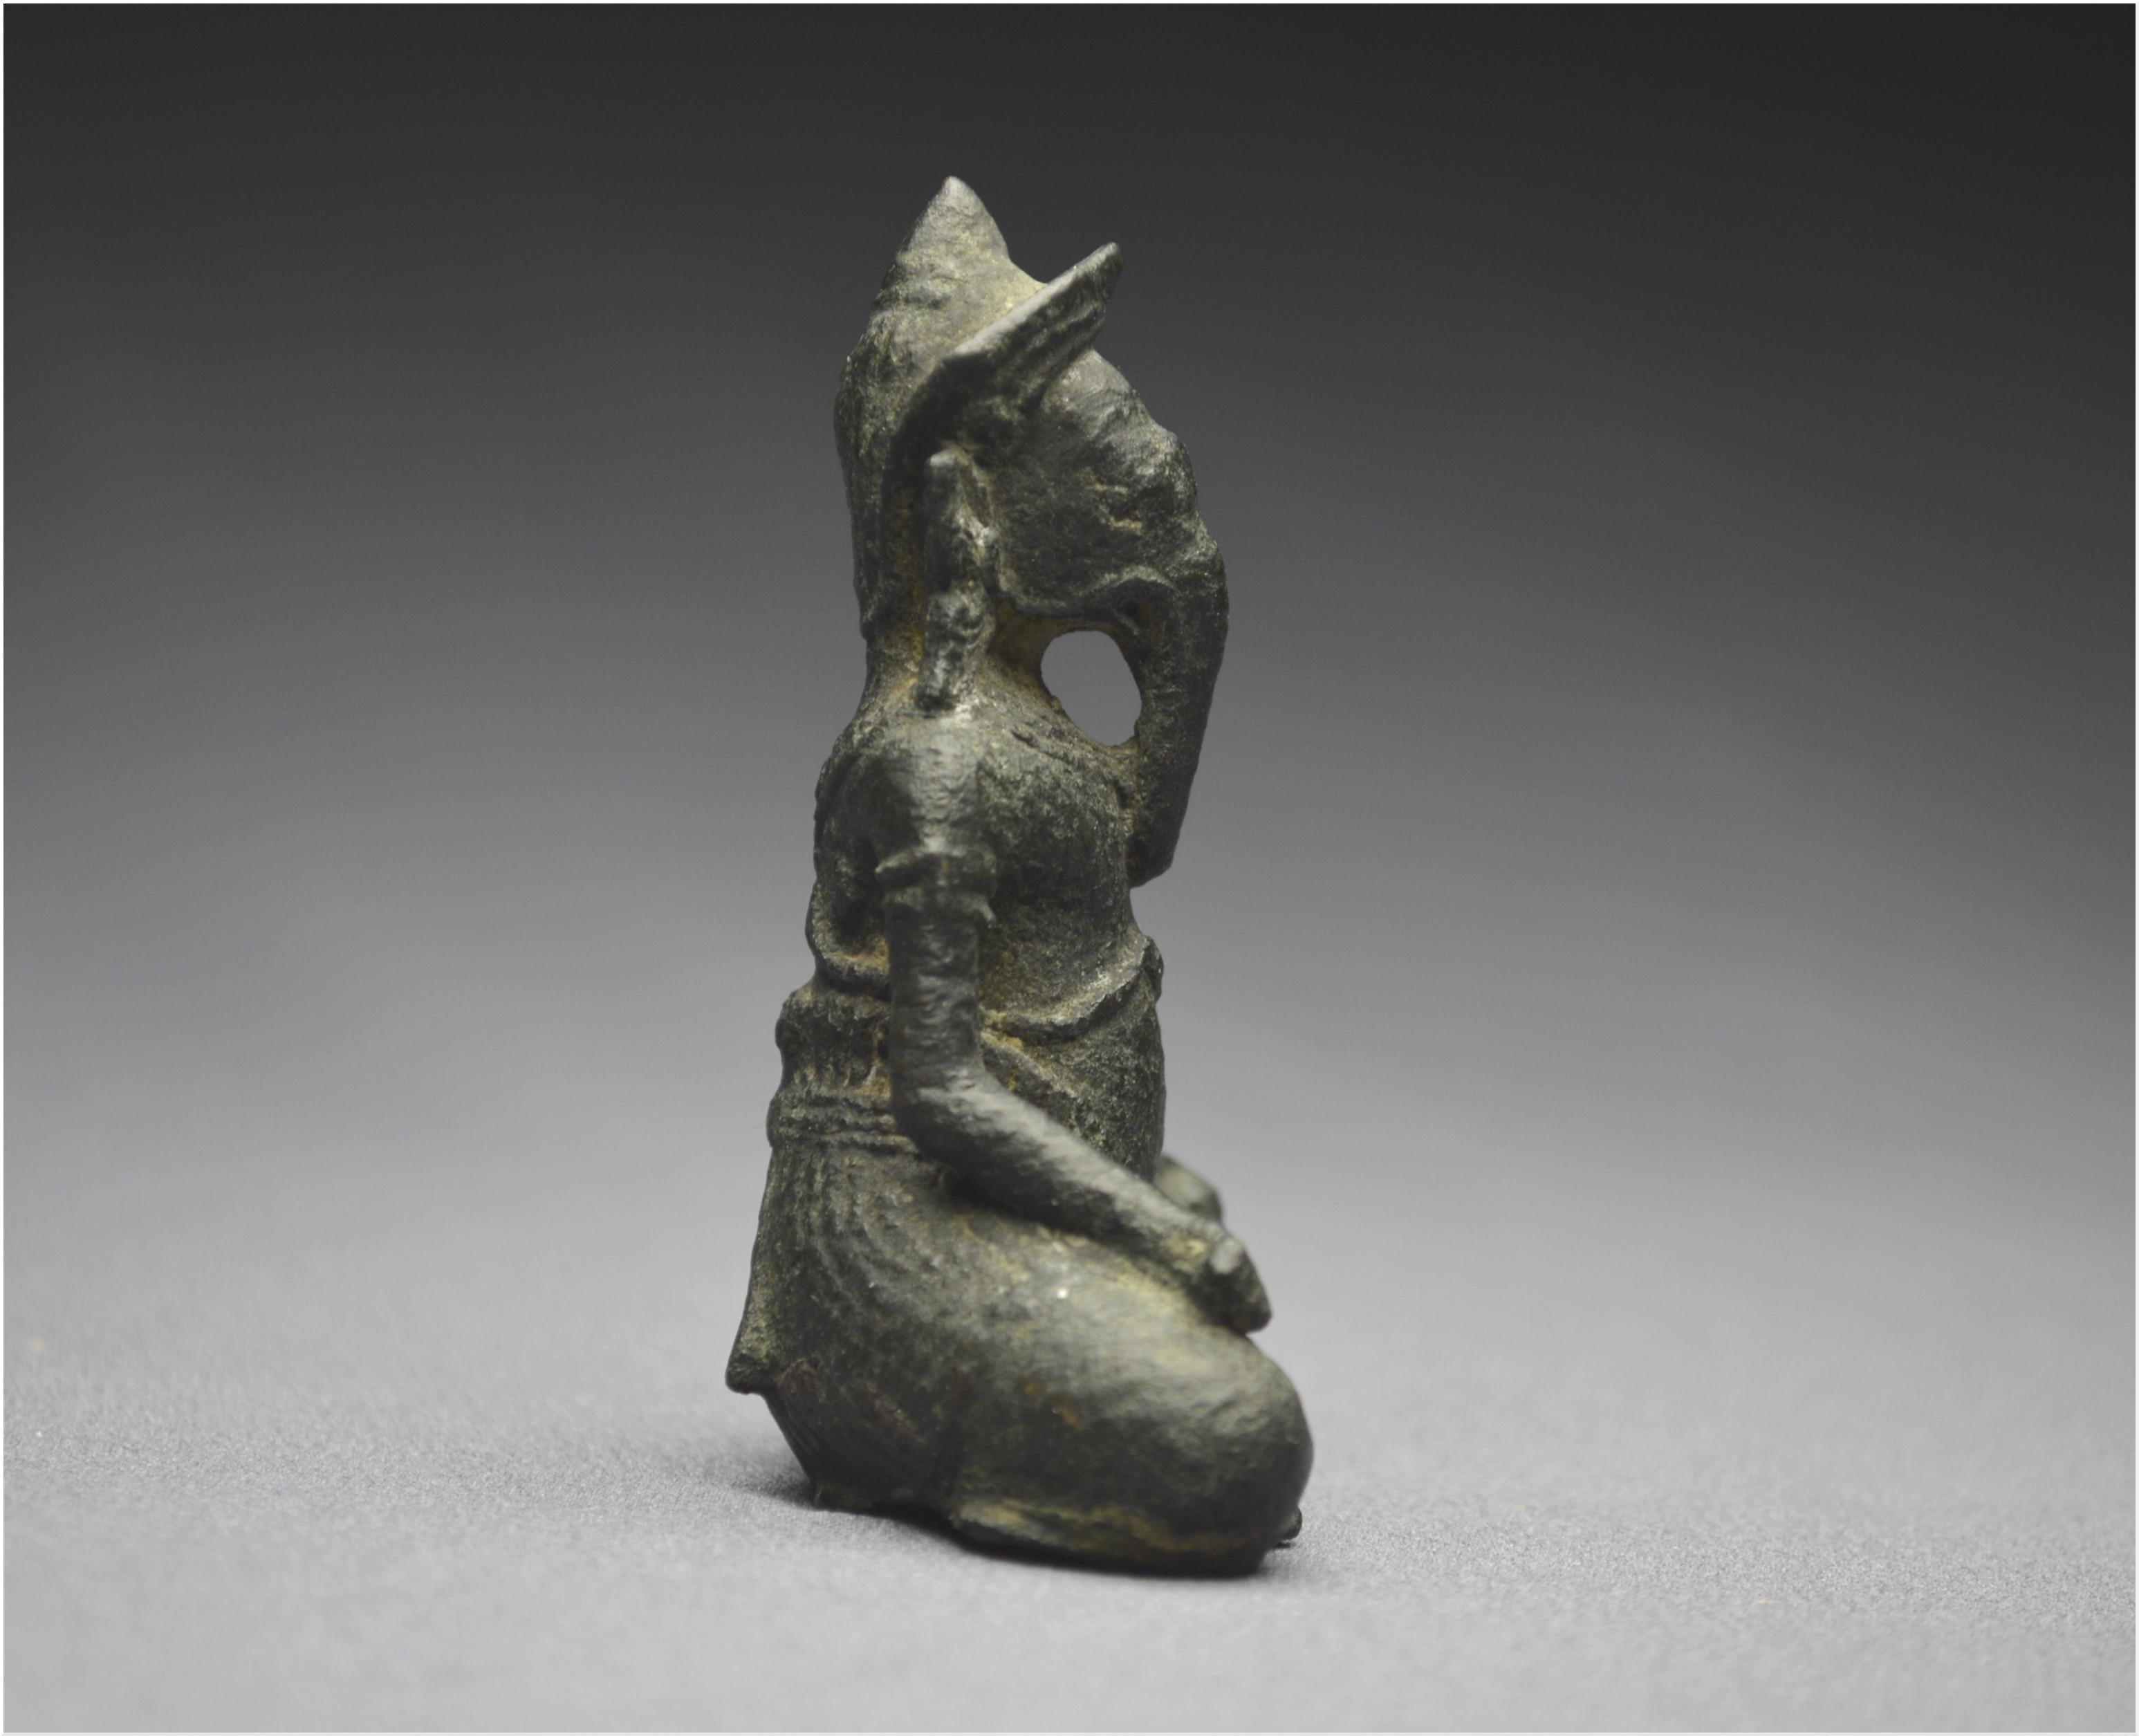 18th Century and Earlier Cambodia, 11th Century, Angkor Vat period, Little bronze statuette of Ganesha